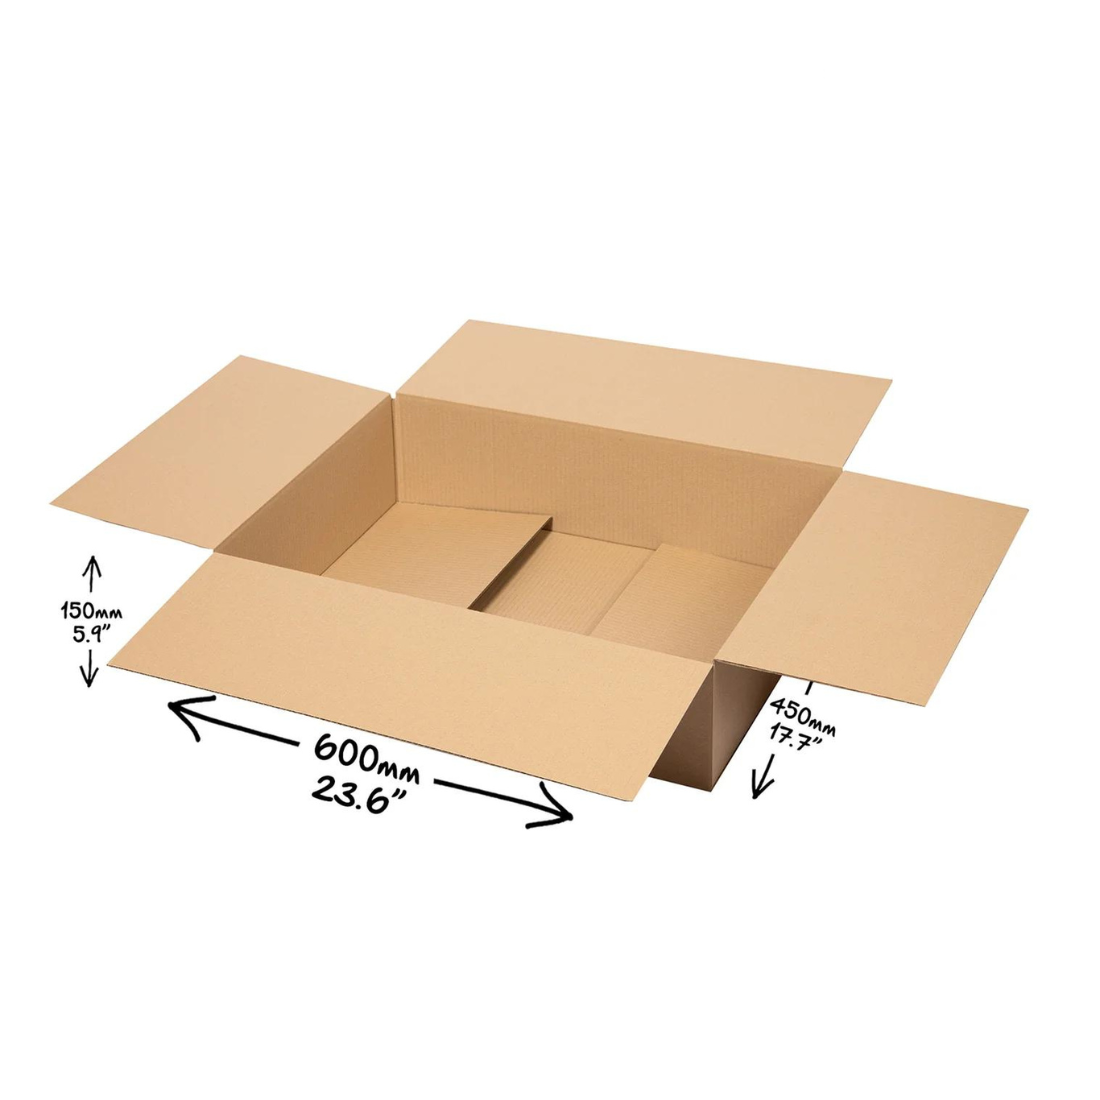 G30 Singled Walled Large Cardboard Boxes - fits 90% of all 2 slice toasters, juicers, Xbox and many other retail items (PACK OF 50)